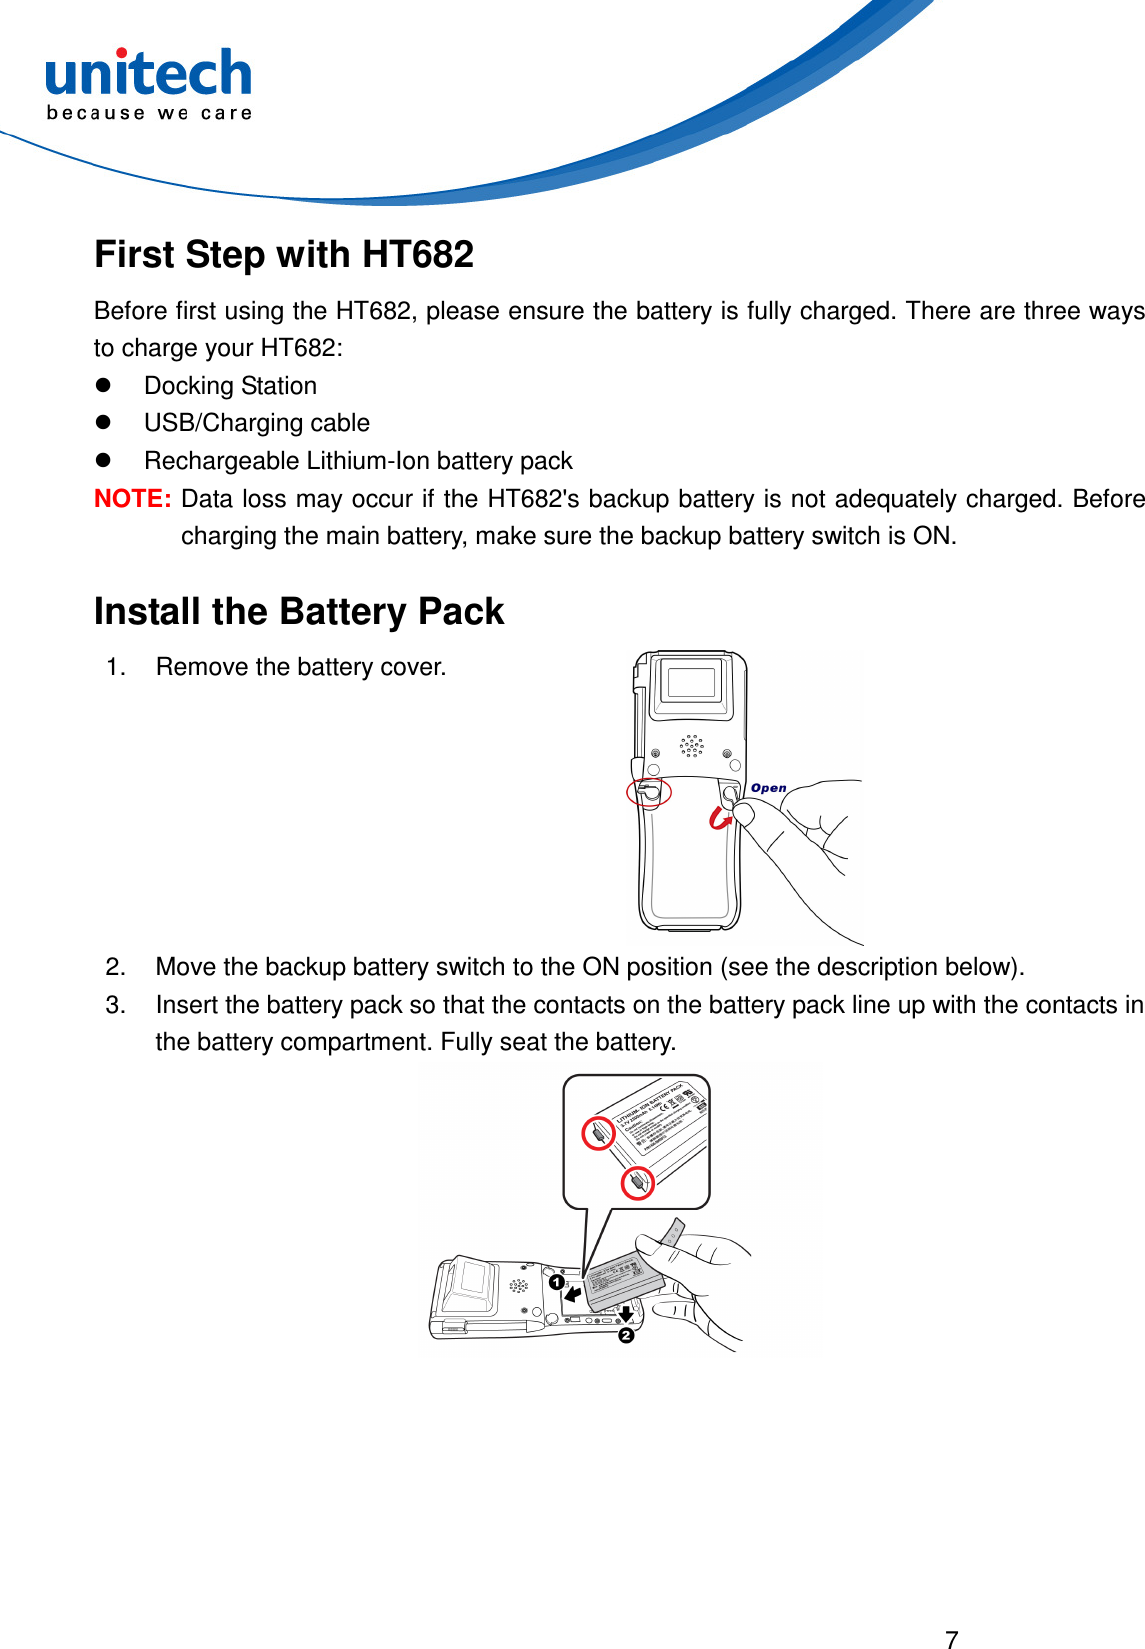  7  First Step with HT682 Before first using the HT682, please ensure the battery is fully charged. There are three ways to charge your HT682:   Docking Station   USB/Charging cable   Rechargeable Lithium-Ion battery pack NOTE: Data loss may occur if the HT682&apos;s backup battery is not adequately charged. Before charging the main battery, make sure the backup battery switch is ON. Install the Battery Pack 1.  Remove the battery cover.  2.  Move the backup battery switch to the ON position (see the description below). 3.  Insert the battery pack so that the contacts on the battery pack line up with the contacts in the battery compartment. Fully seat the battery.  